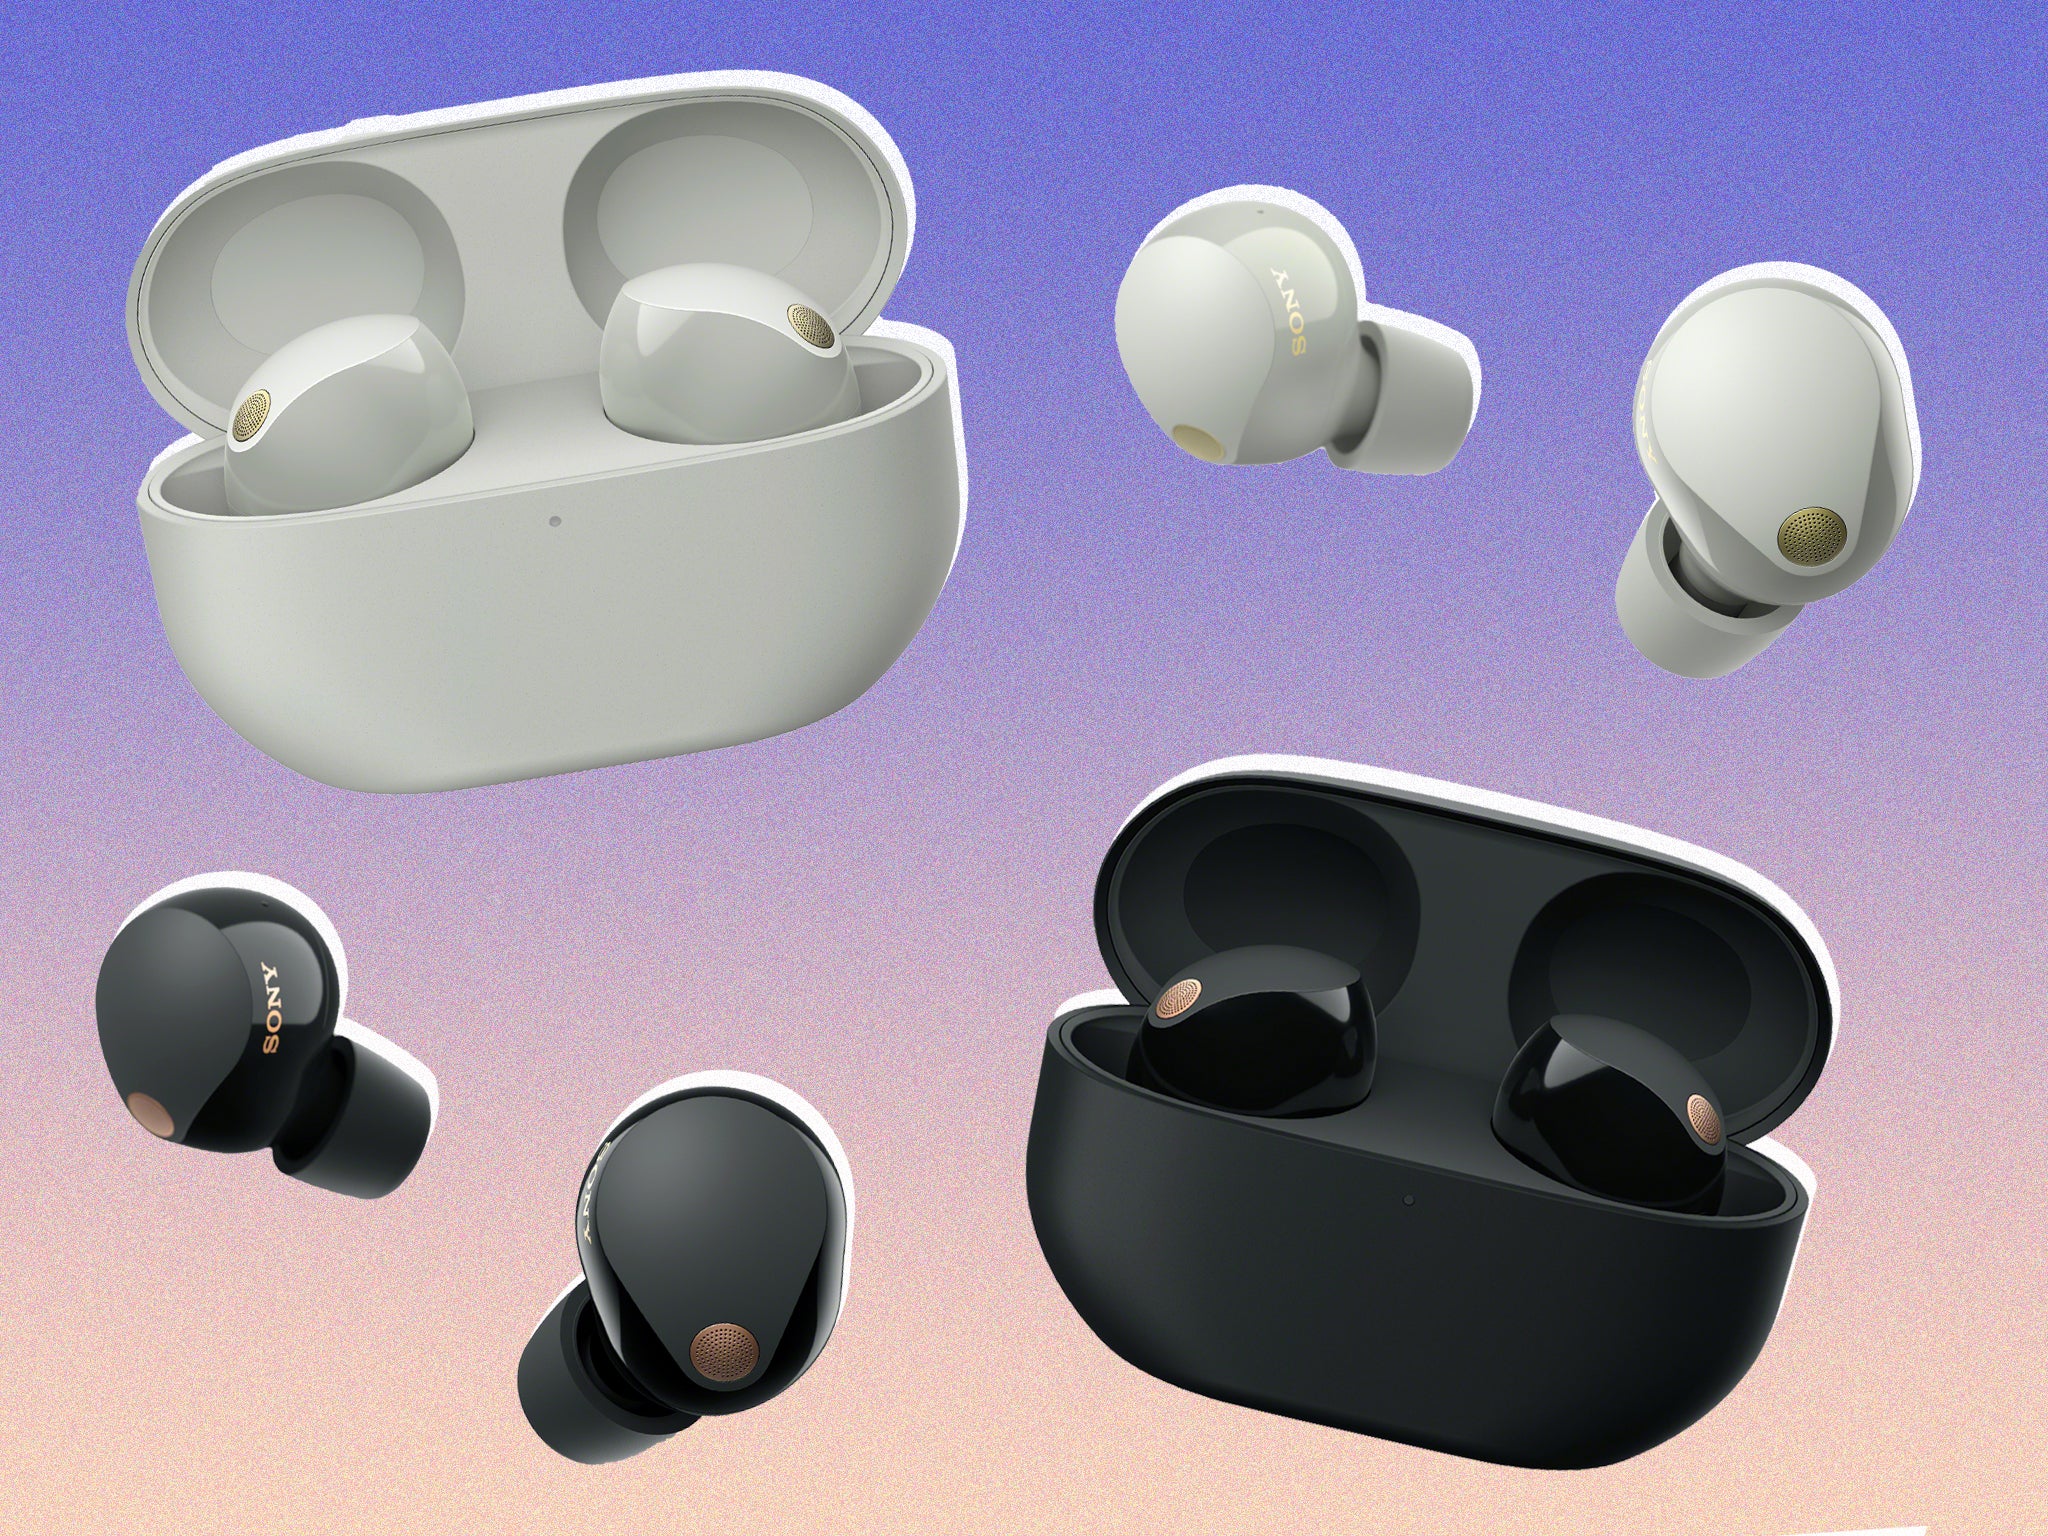 Sony WF-1000XM5 wireless earbuds are out now: Release date and